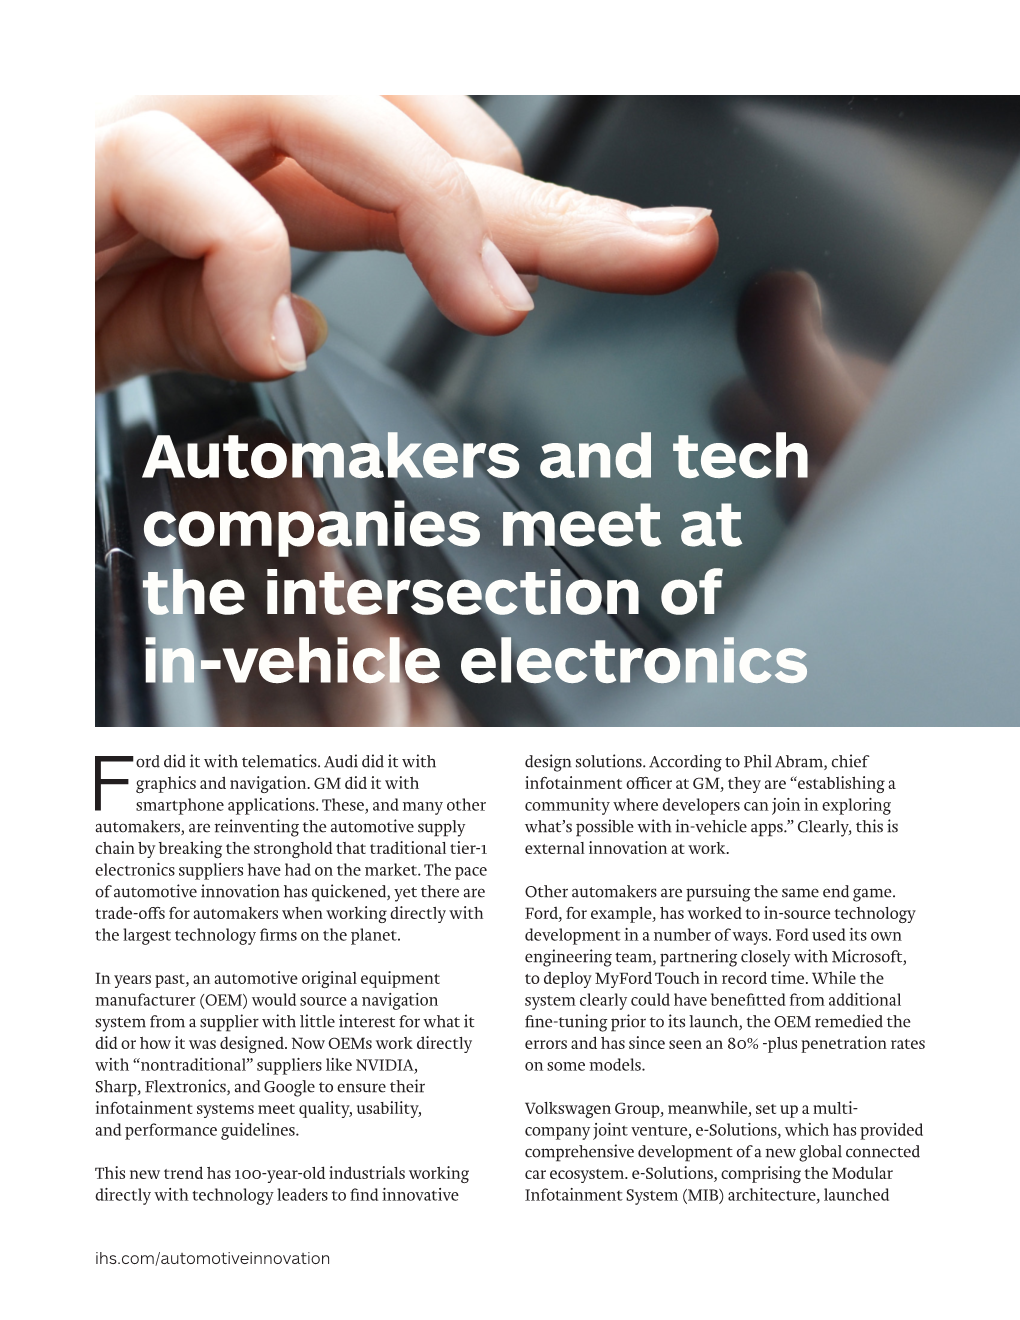 Automakers and Tech Companies Meet at the Intersection of In-Vehicle Electronics